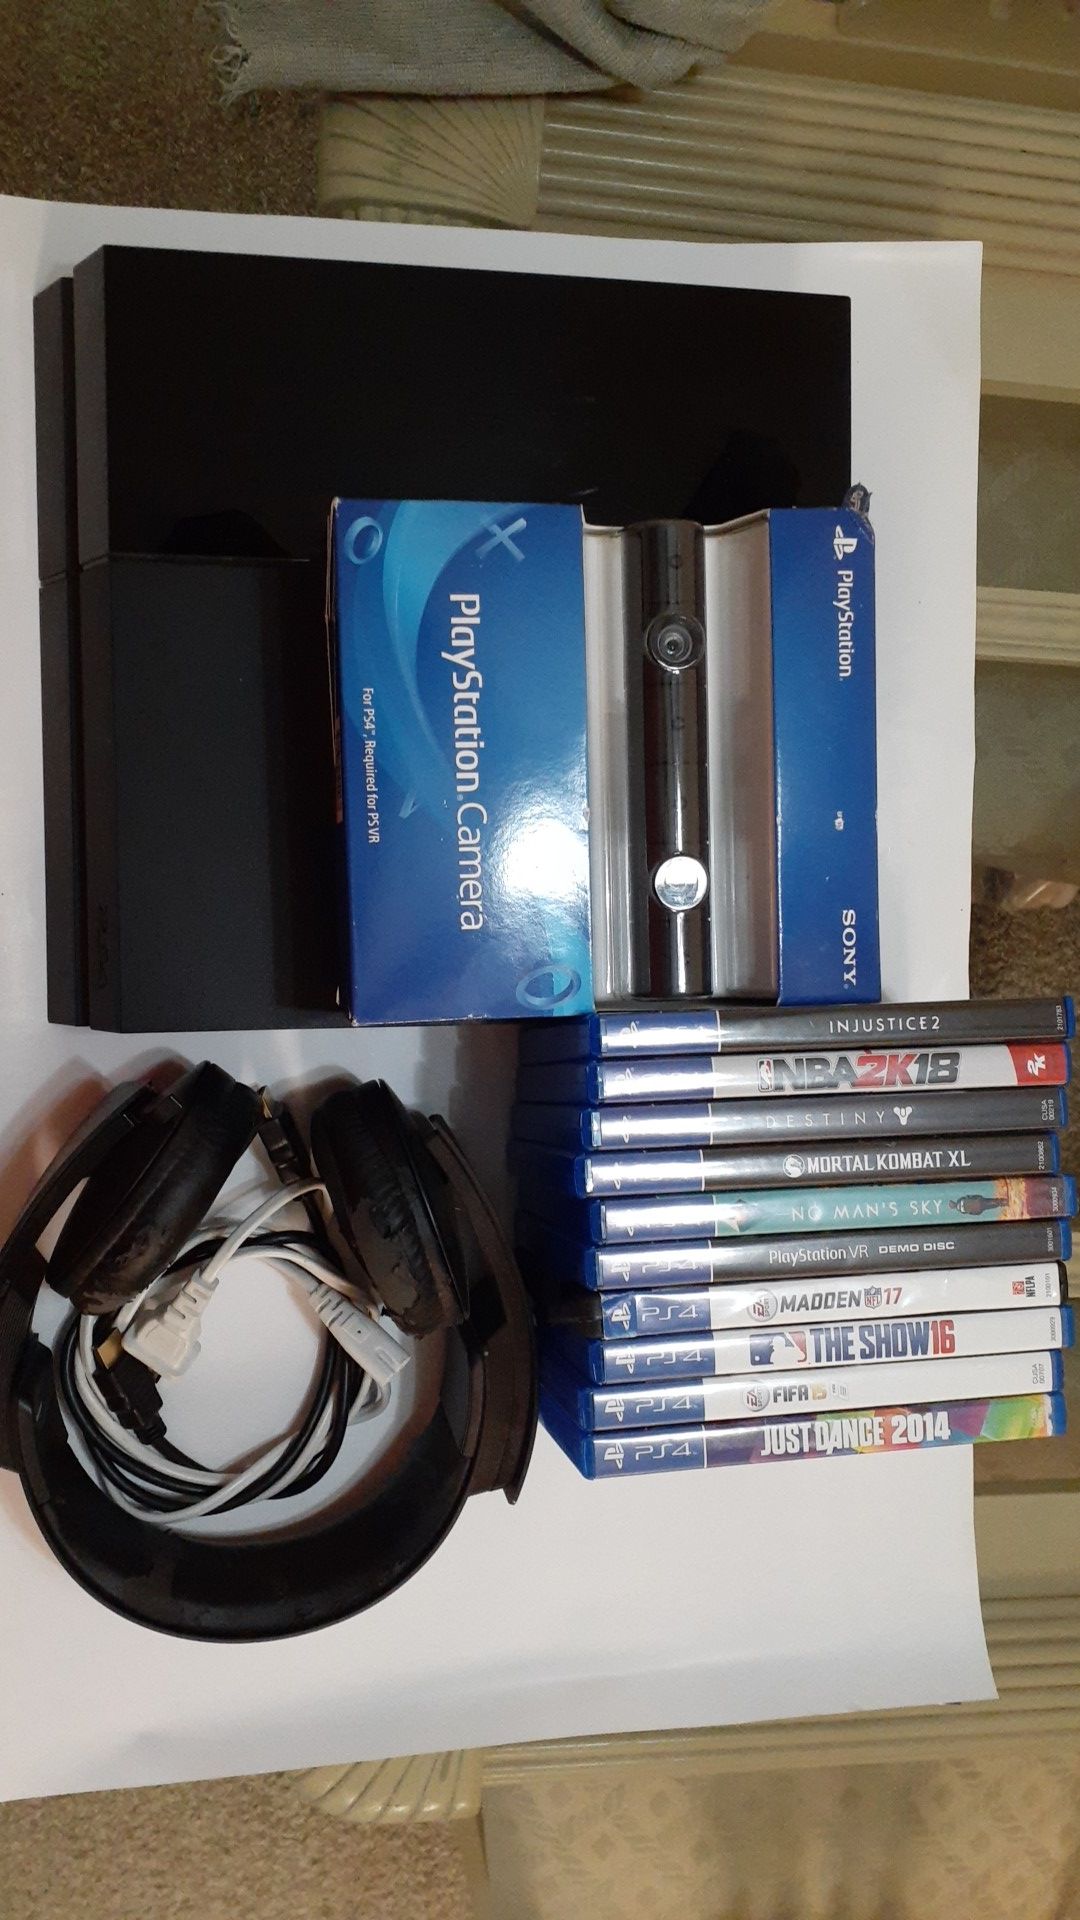 Sony ps4 comes with consoles + 10 game + headphone + camera